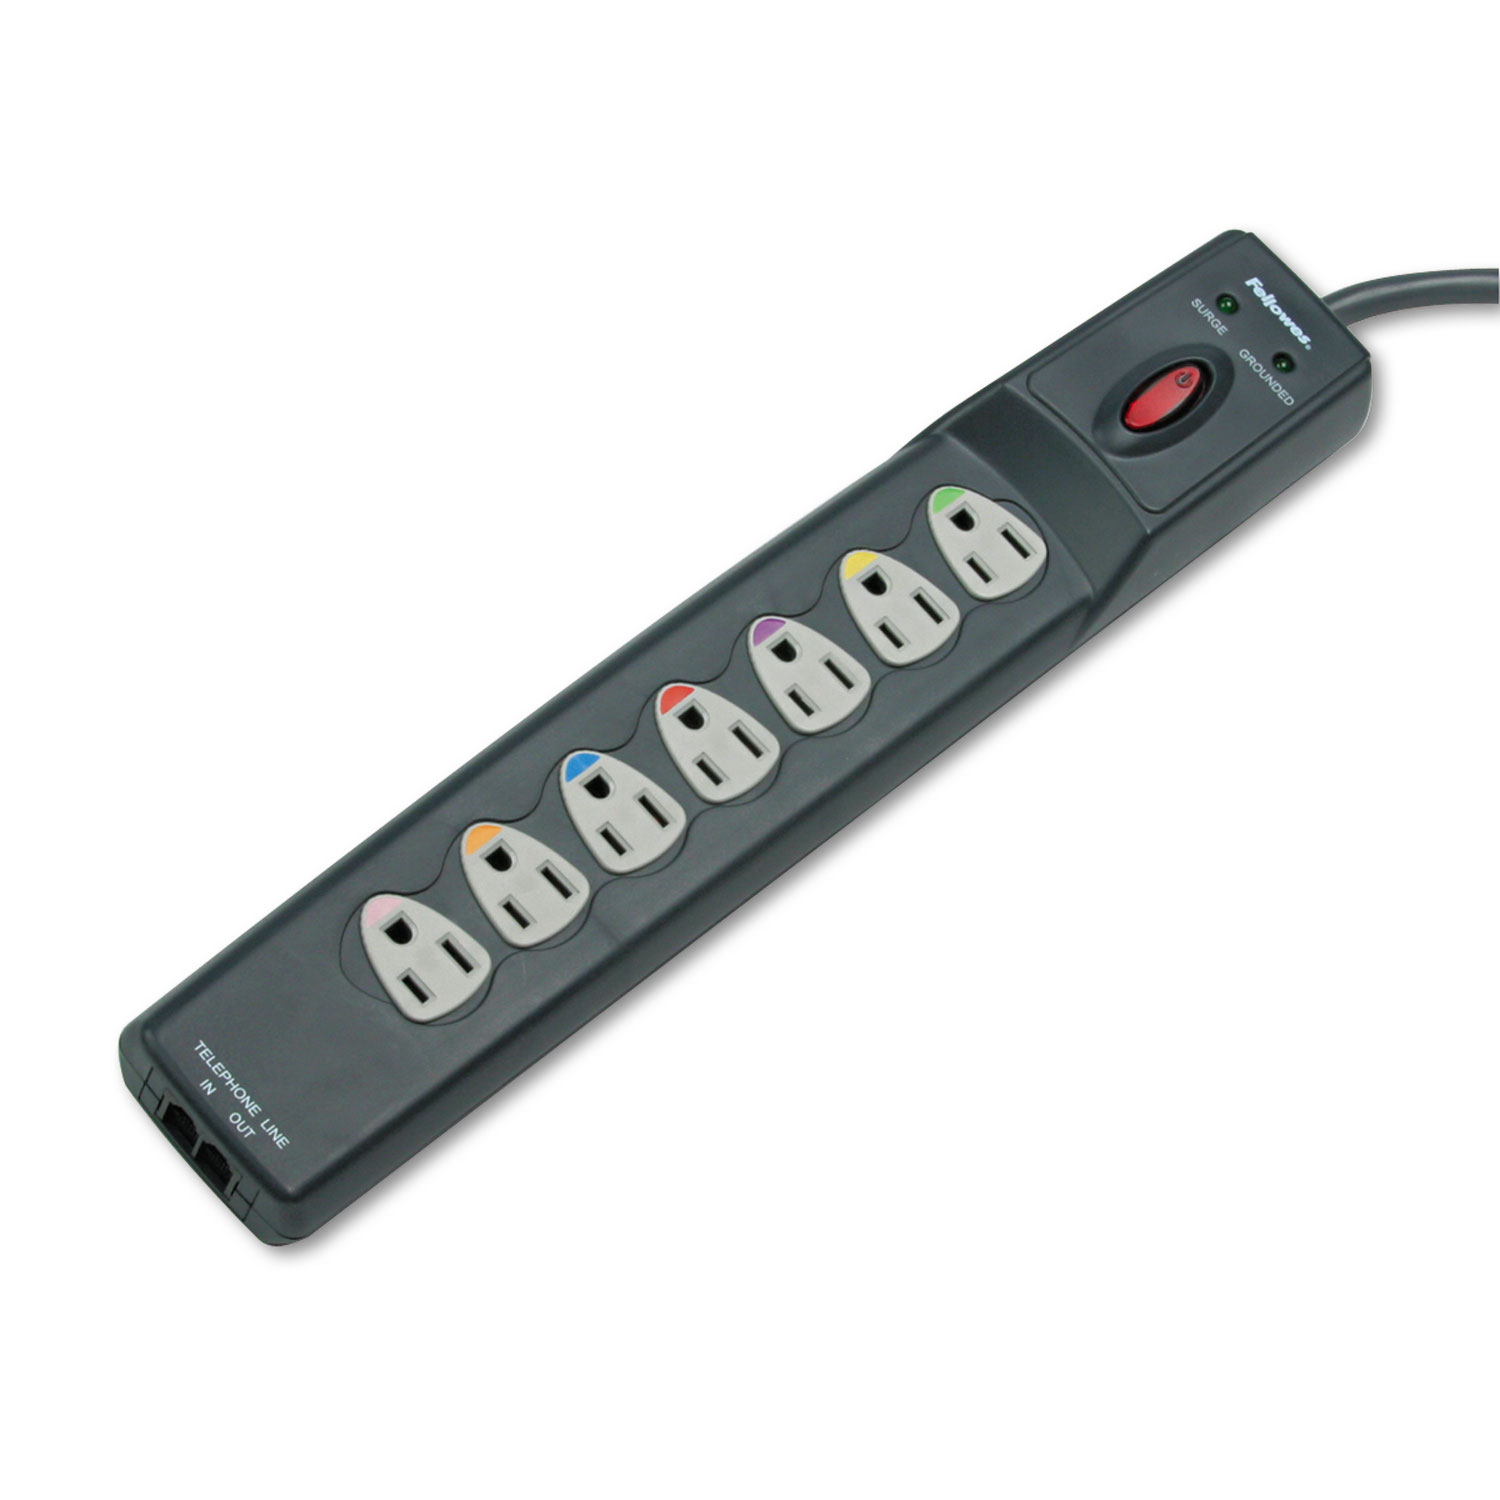  Fellowes 99110 Power Guard Surge Protector, 7 Outlets, 6 ft Cord, 1600 Joules, Gray (FEL99110) 